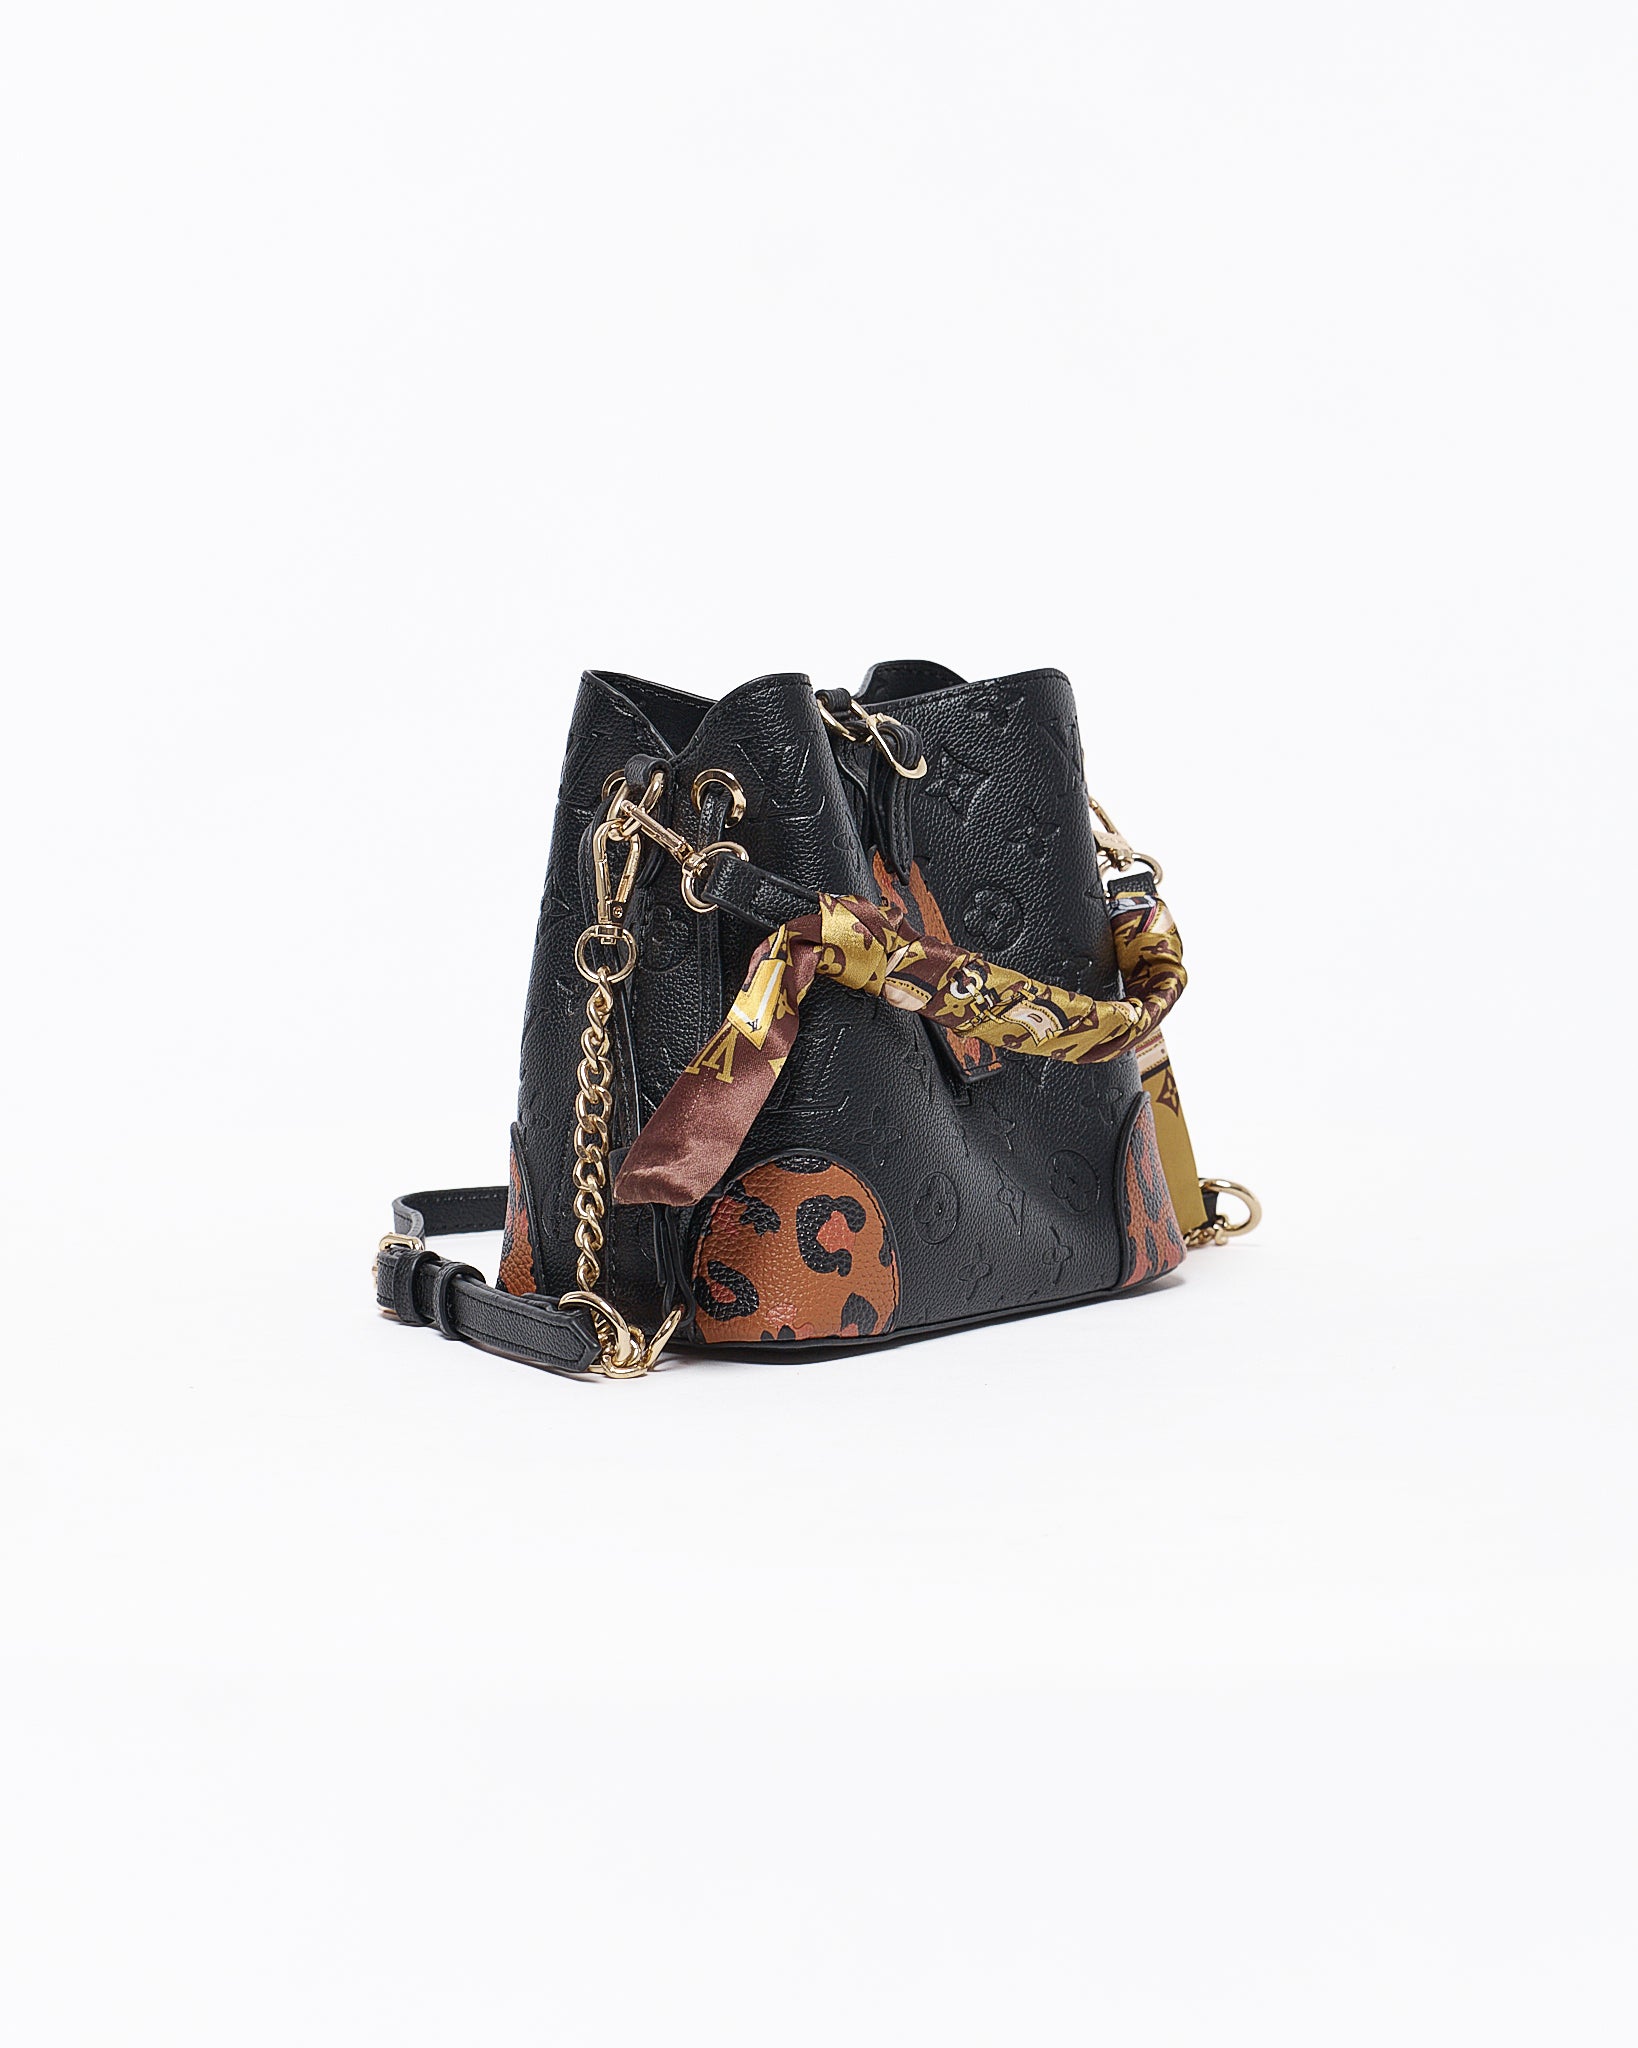 MOI OUTFIT-Monogram Leather Lady Bucket Bag 129.90